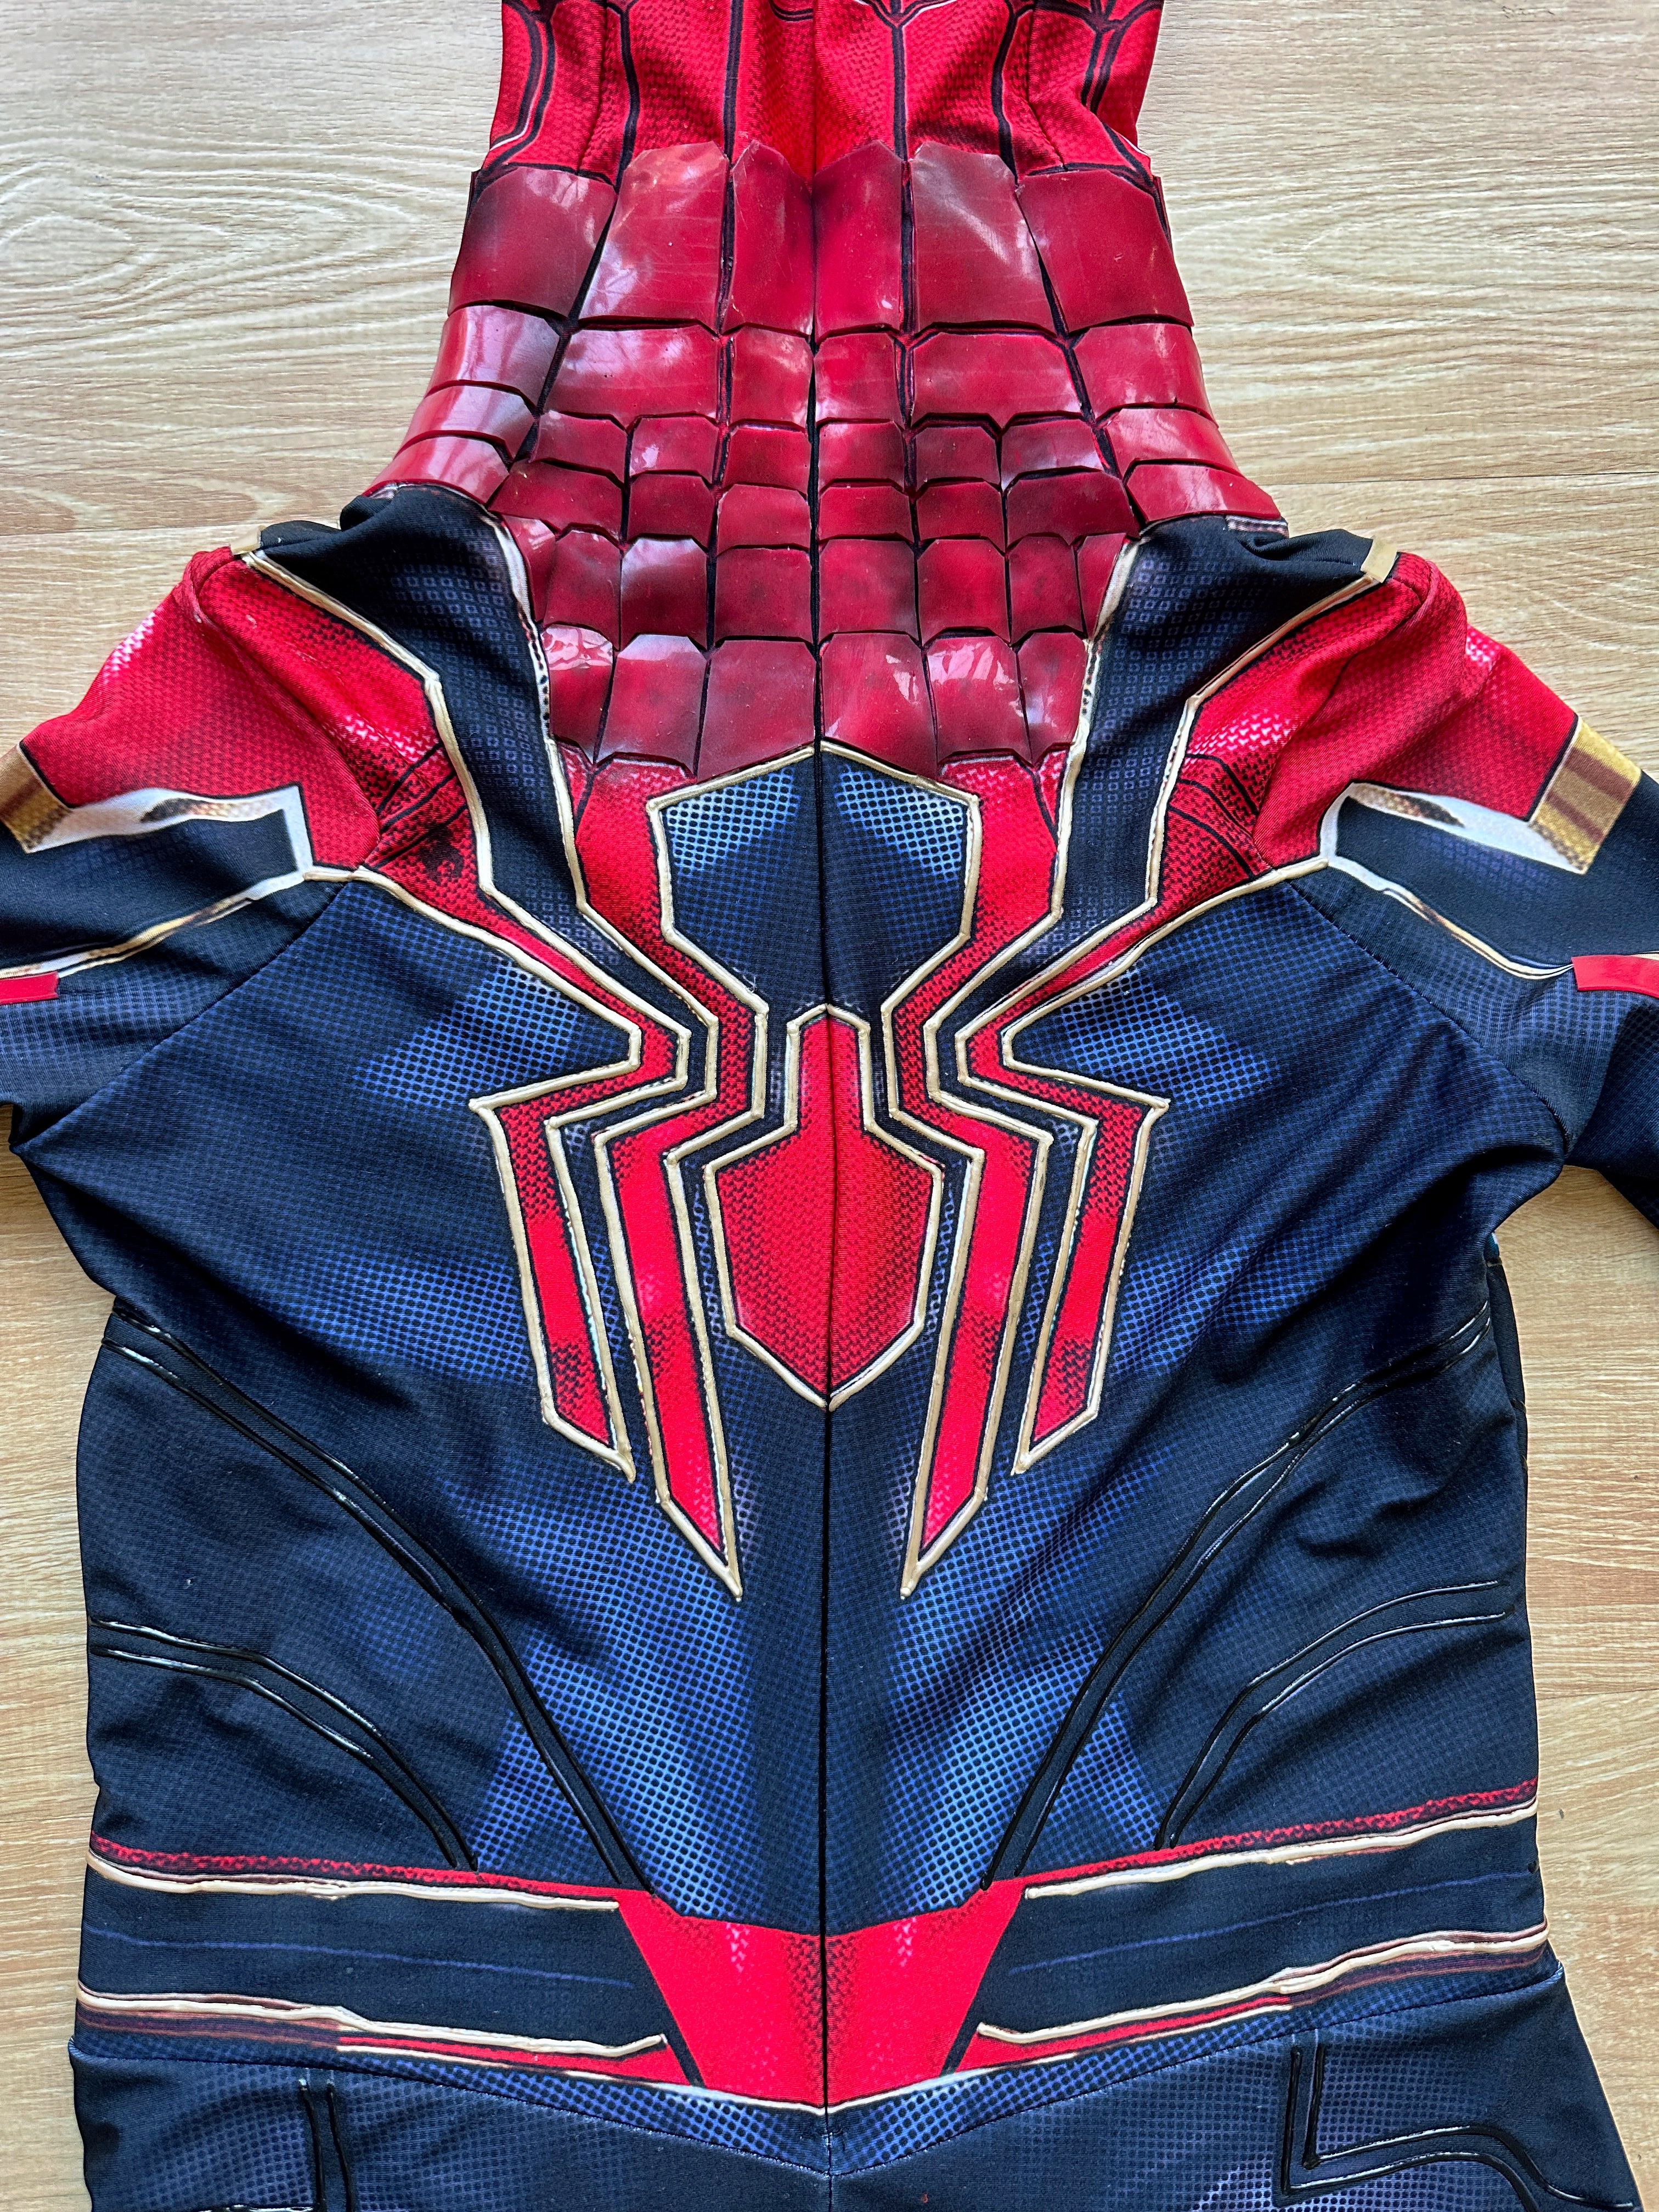 TOM HOLLAND Suit Iron Spidey Version with Face shell & 3D Rubber Web Movie Prop Replica(wearable)